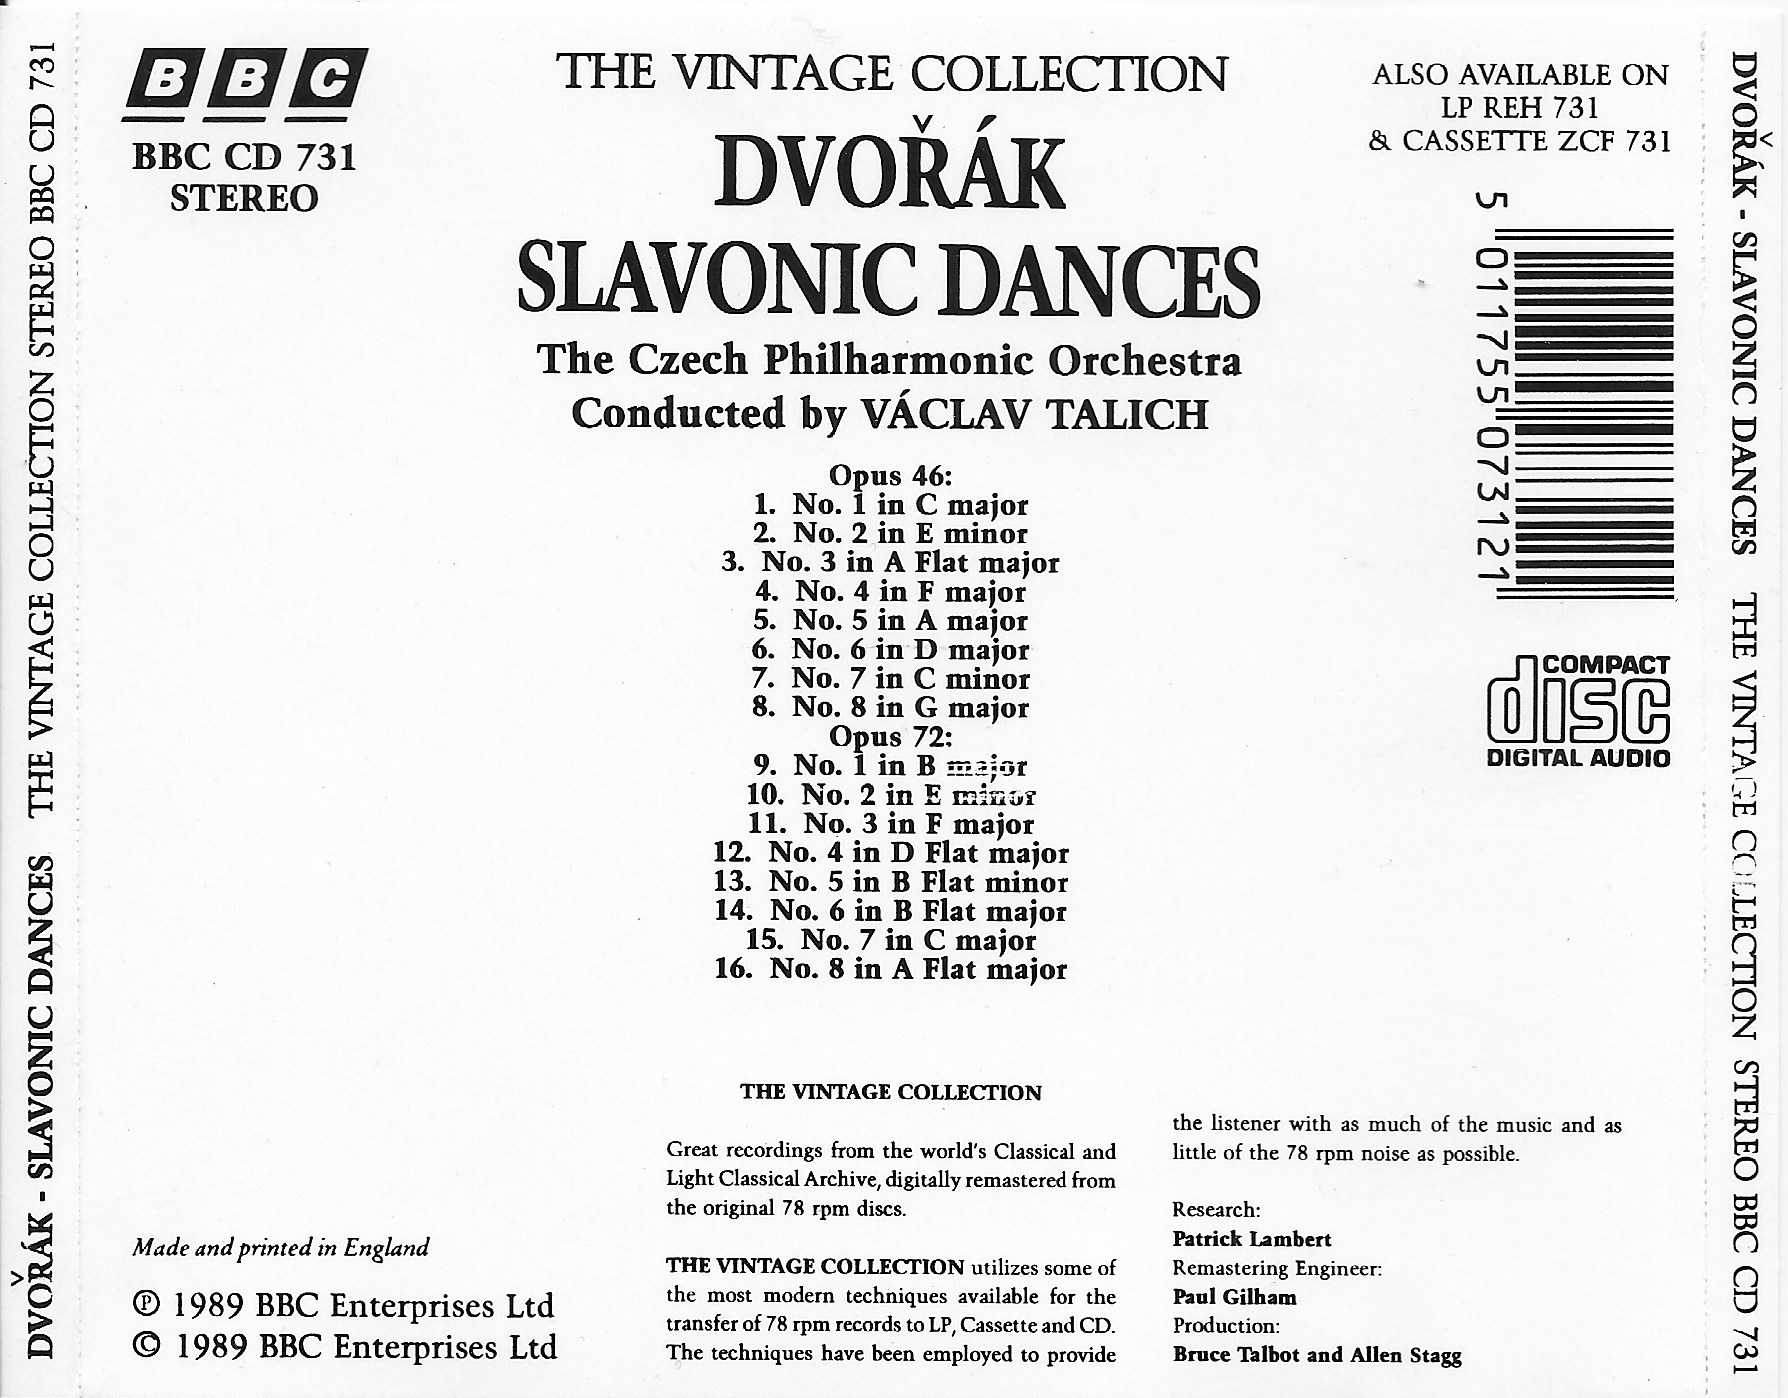 Back cover of BBCCD731